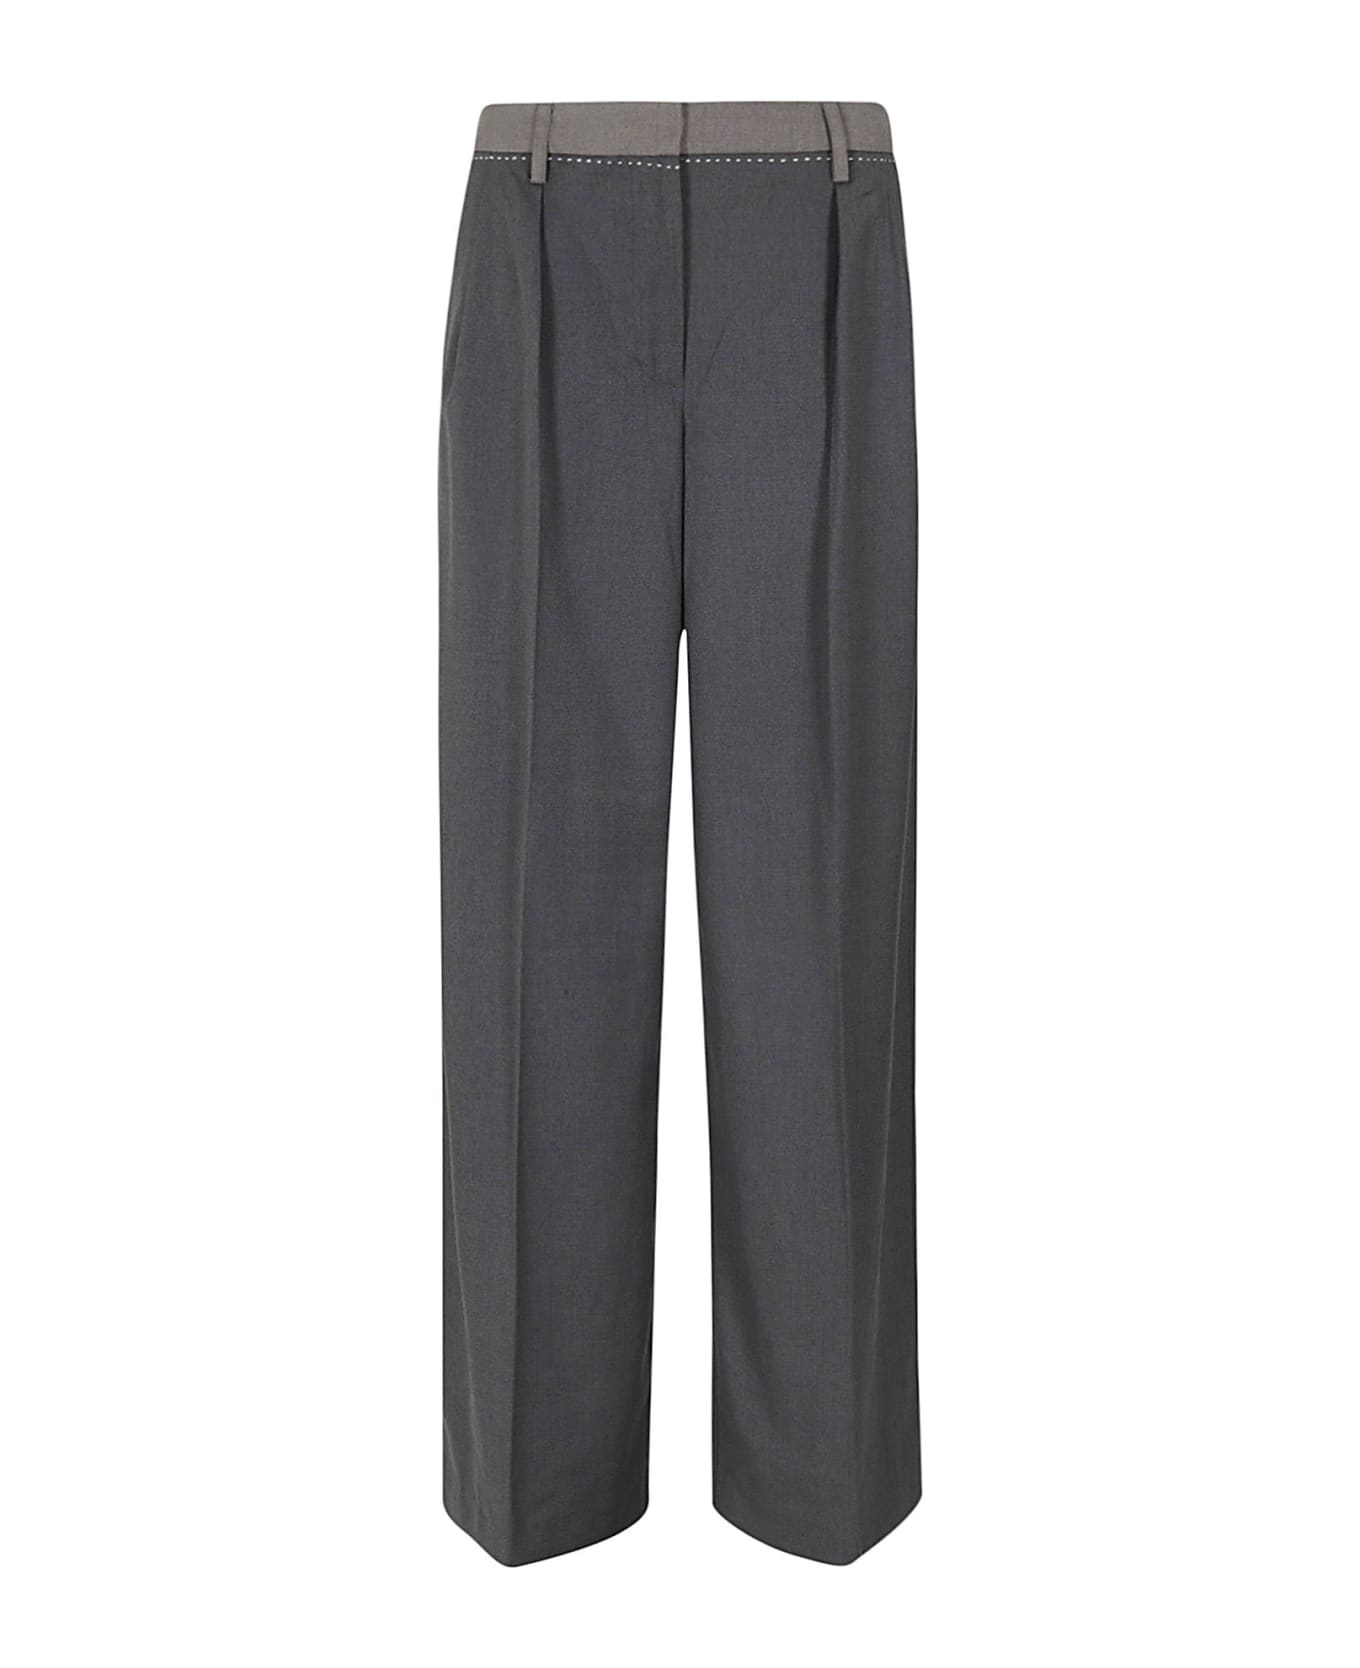 REMAIN Birger Christensen Two Color Wide Pants ボトムス